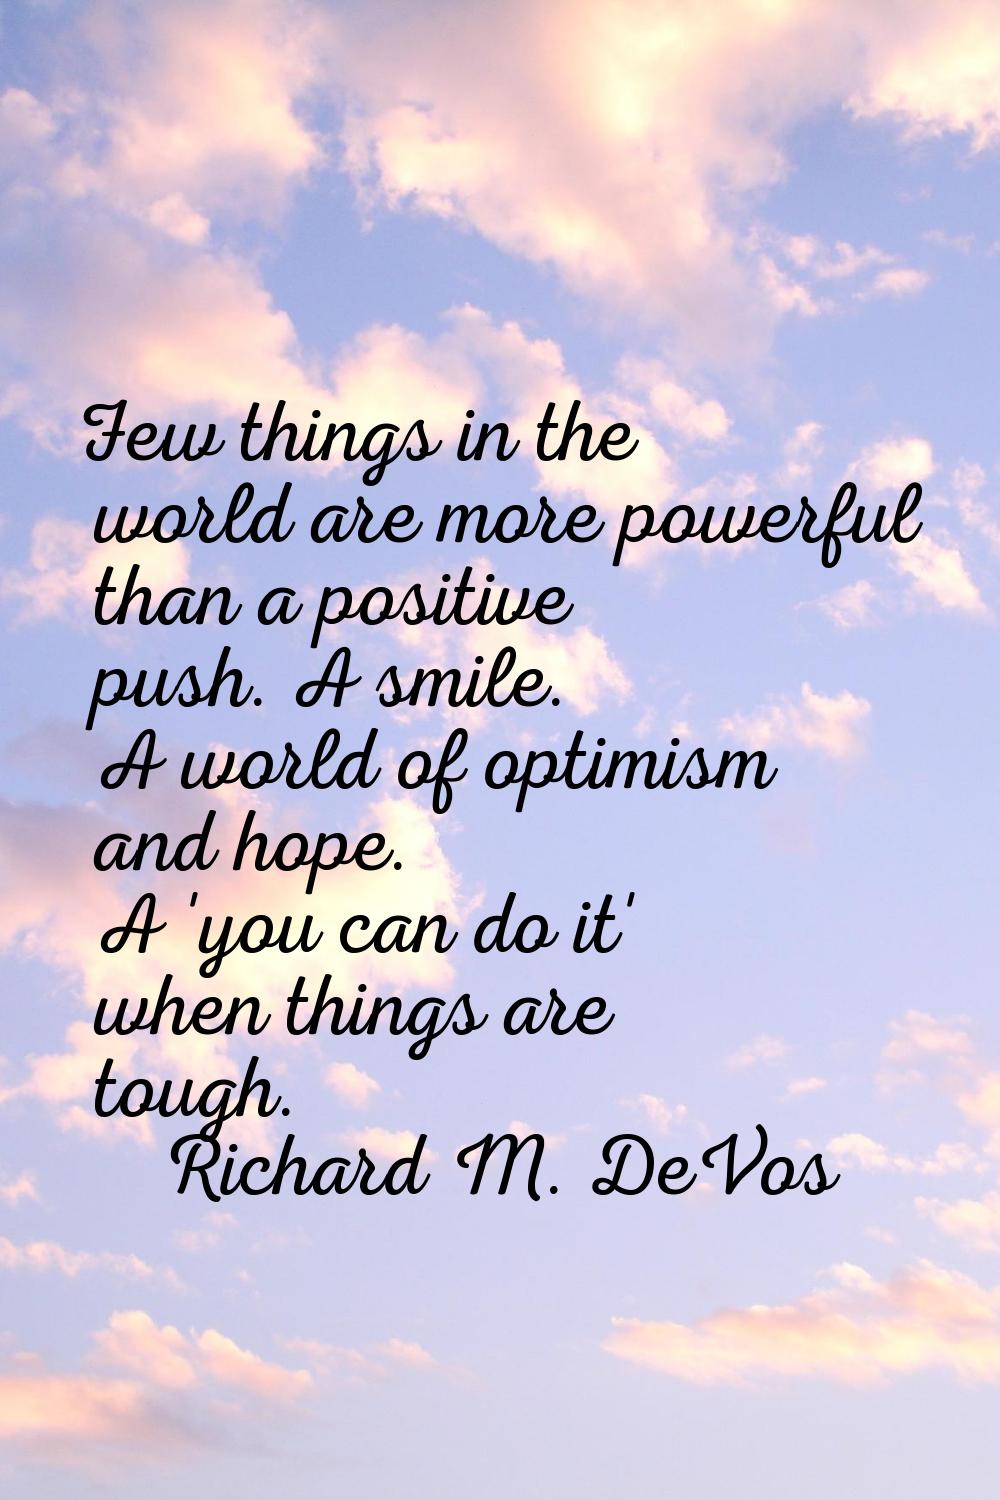 Few things in the world are more powerful than a positive push. A smile. A world of optimism and ho